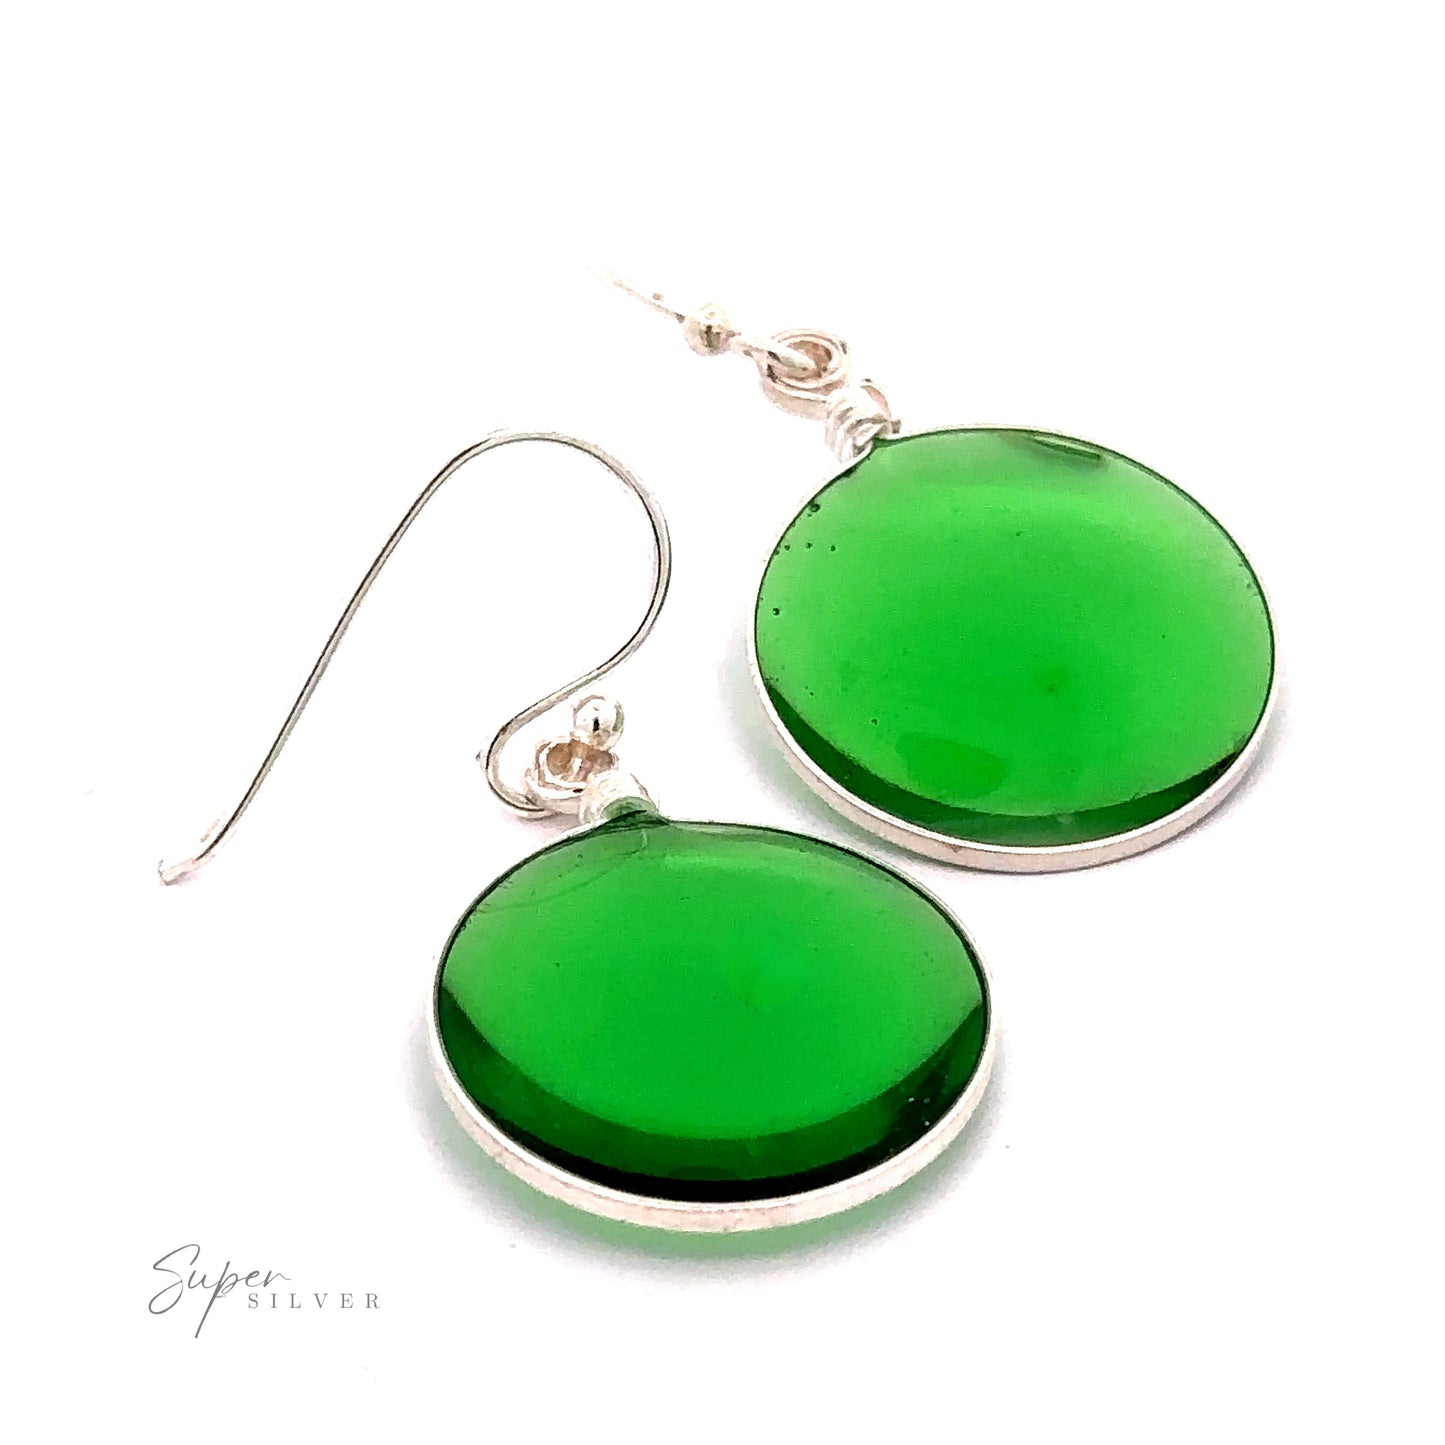 
                  
                    A simple set of Round Glass Earrings with silver hooks, each featuring a smooth, glossy green surface set in a thin .925 Sterling Silver rim. The image includes the text "Super Silver" in the bottom left corner.
                  
                